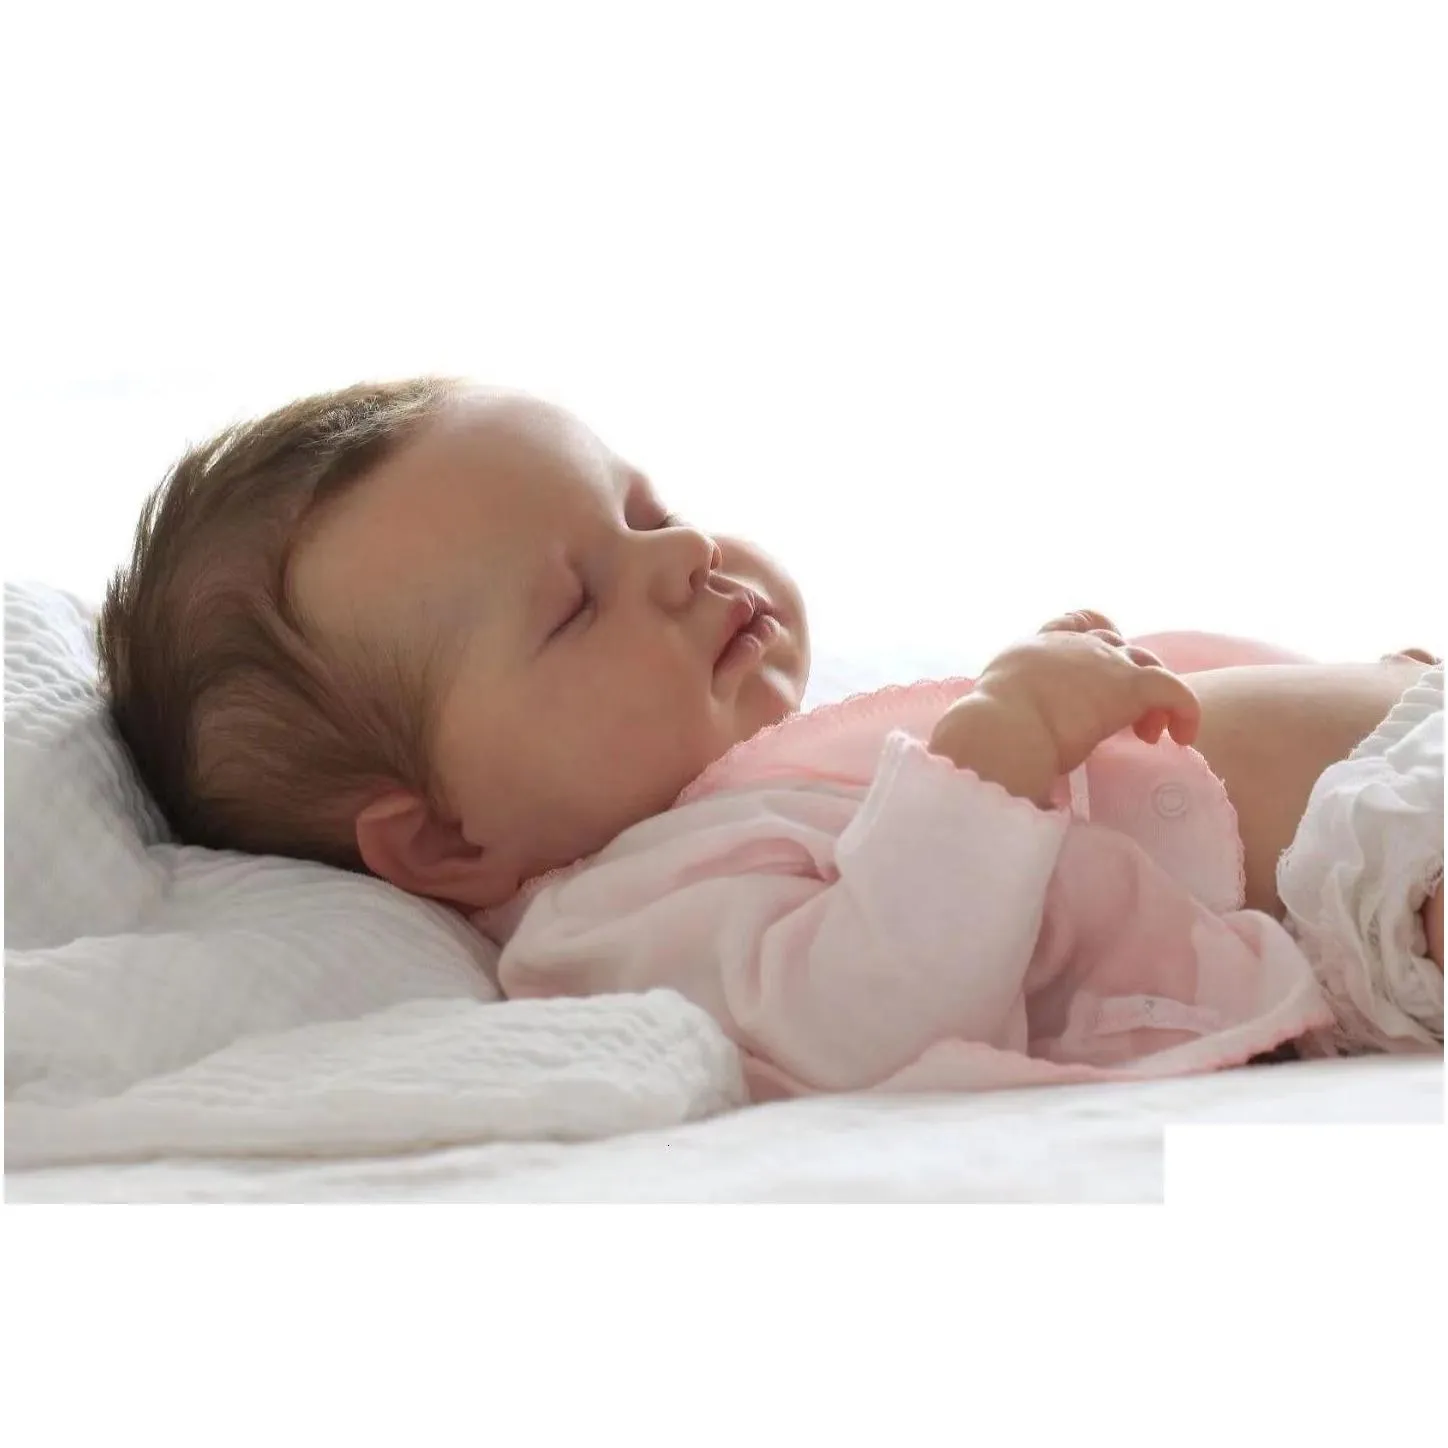 dolls 50cm whole body silicone vinyl loulou bebe reborn girl and boy with painted visible veins handmade lifelike reborn baby doll